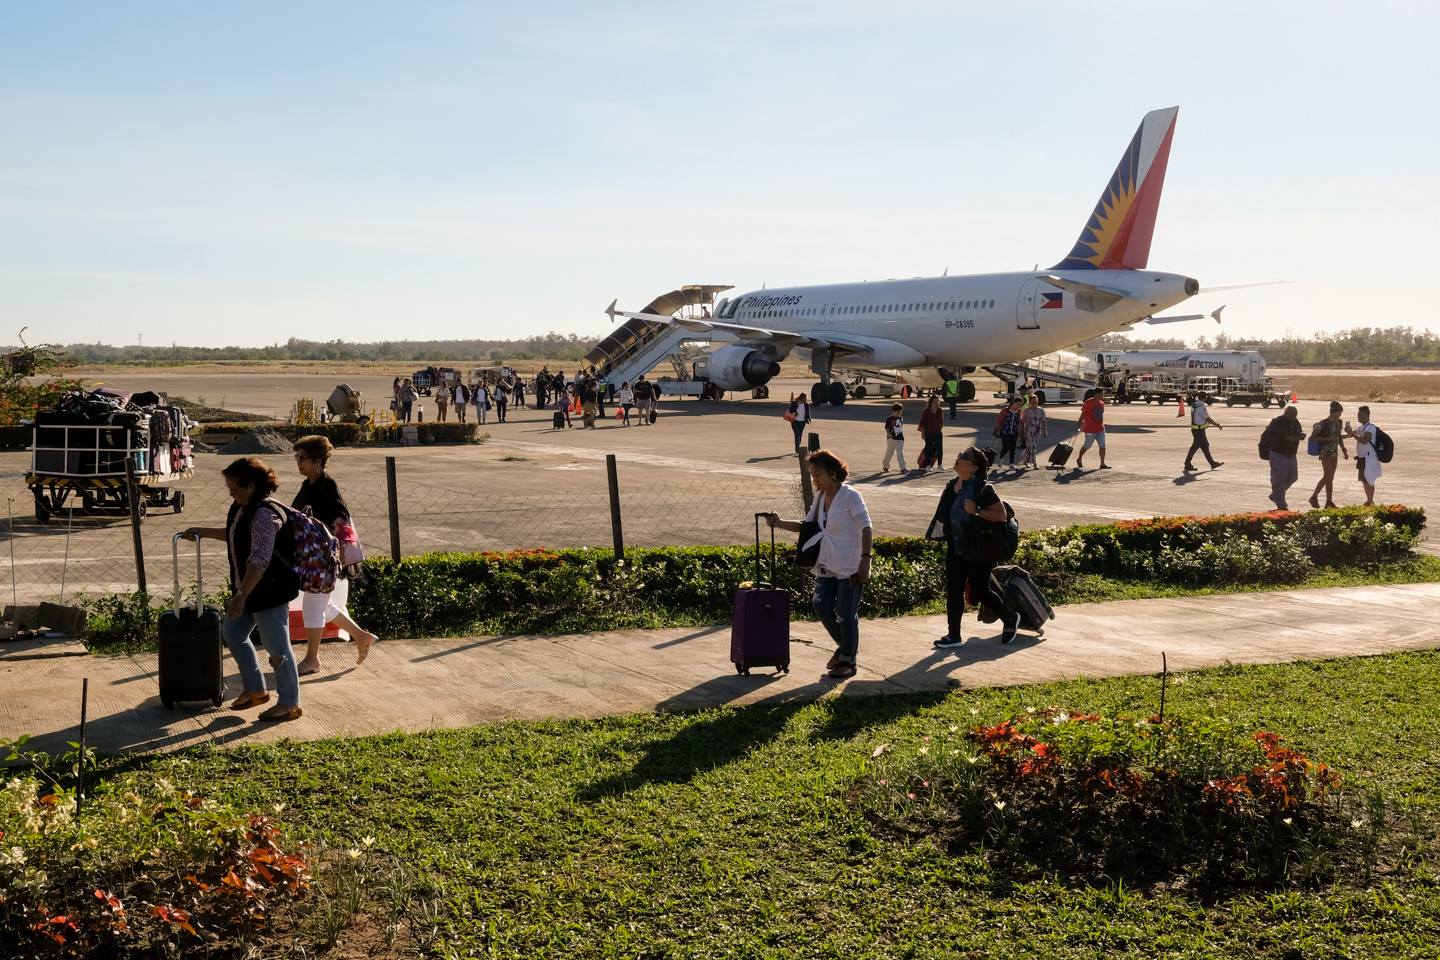 The country’s flag carrier, the Philippine Airlines (PAL), has ramped up the number of flights to Ilocos Norte beginning Tuesday (March 1), the Ilocos Norte tourism office (INTO) announced on Monday, Feb. 28.